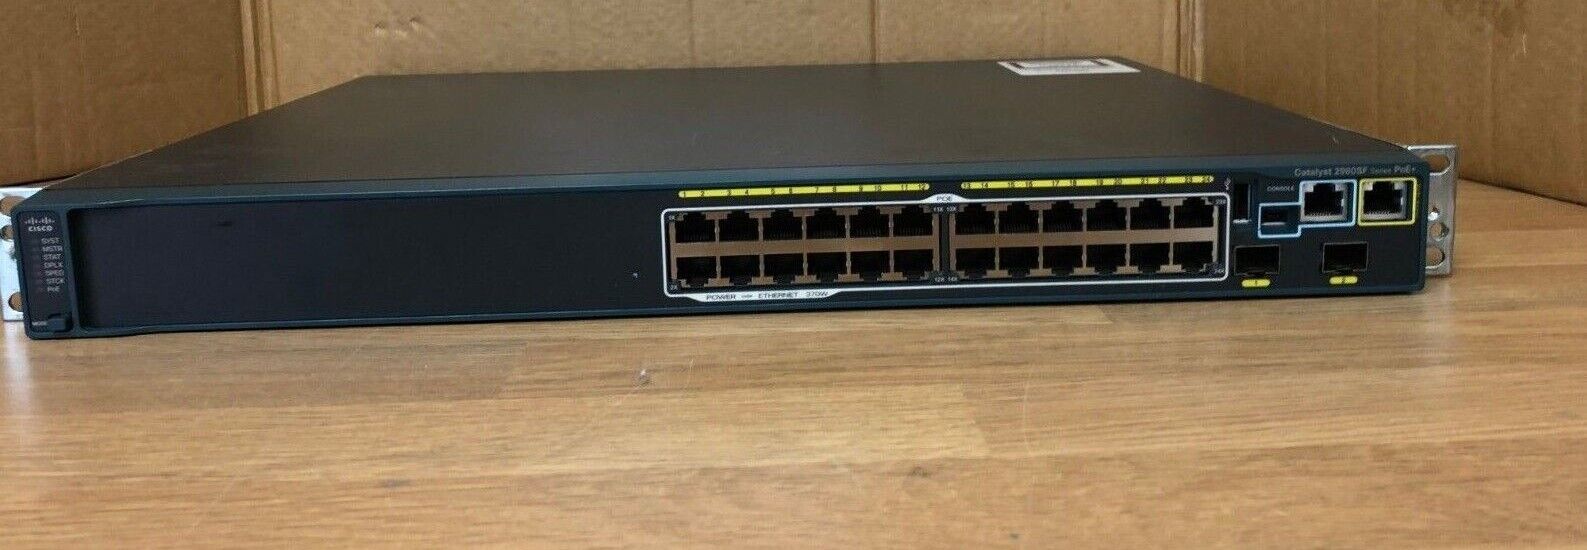 Cisco 2960S WS-C2960S-F24PS-L 24Port PoE+ FASTEthernet Switch PoE 15.2 OS